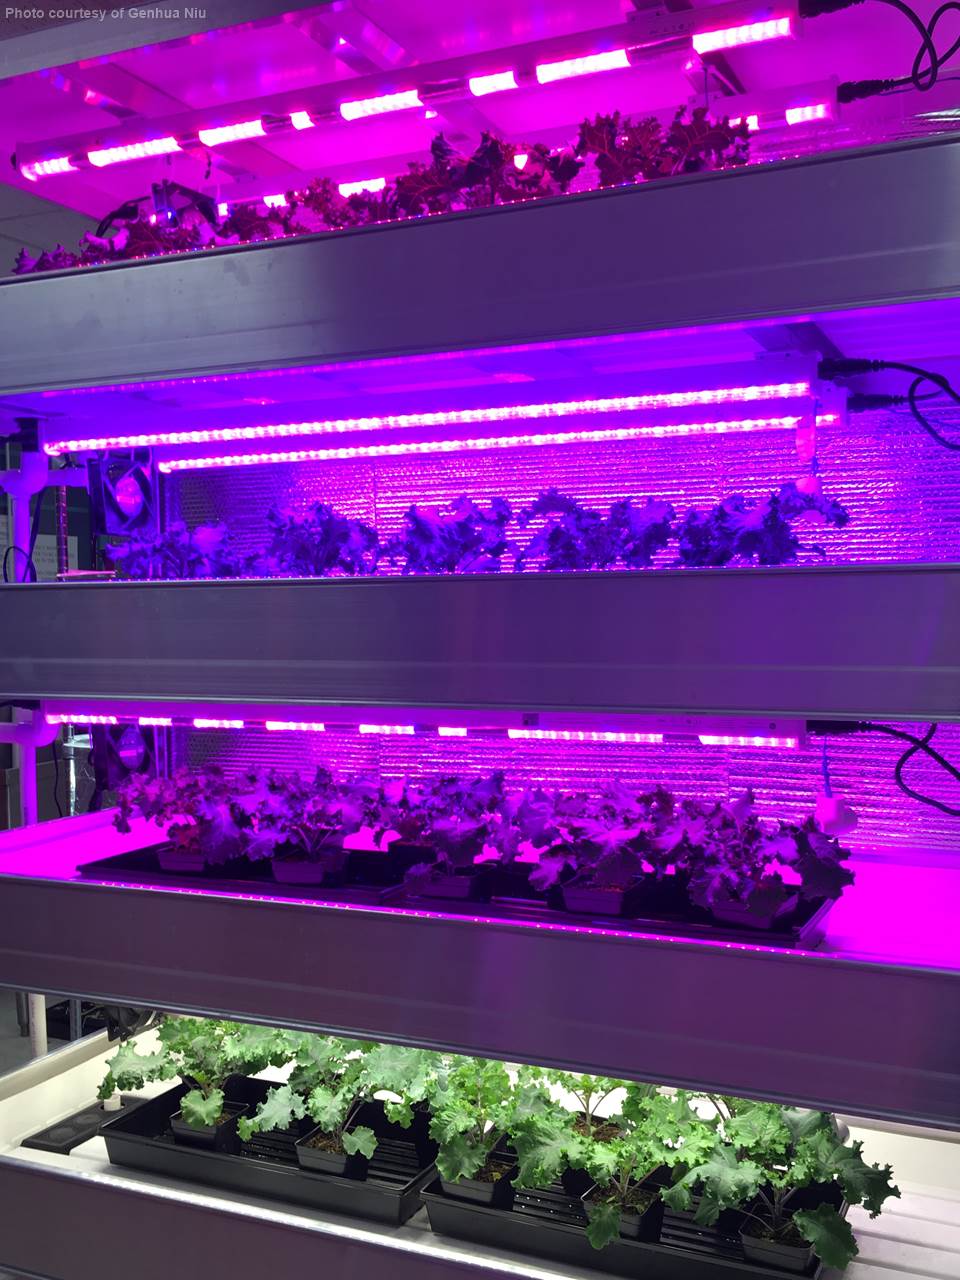 Vertical farming using LED lights for leafy greens.